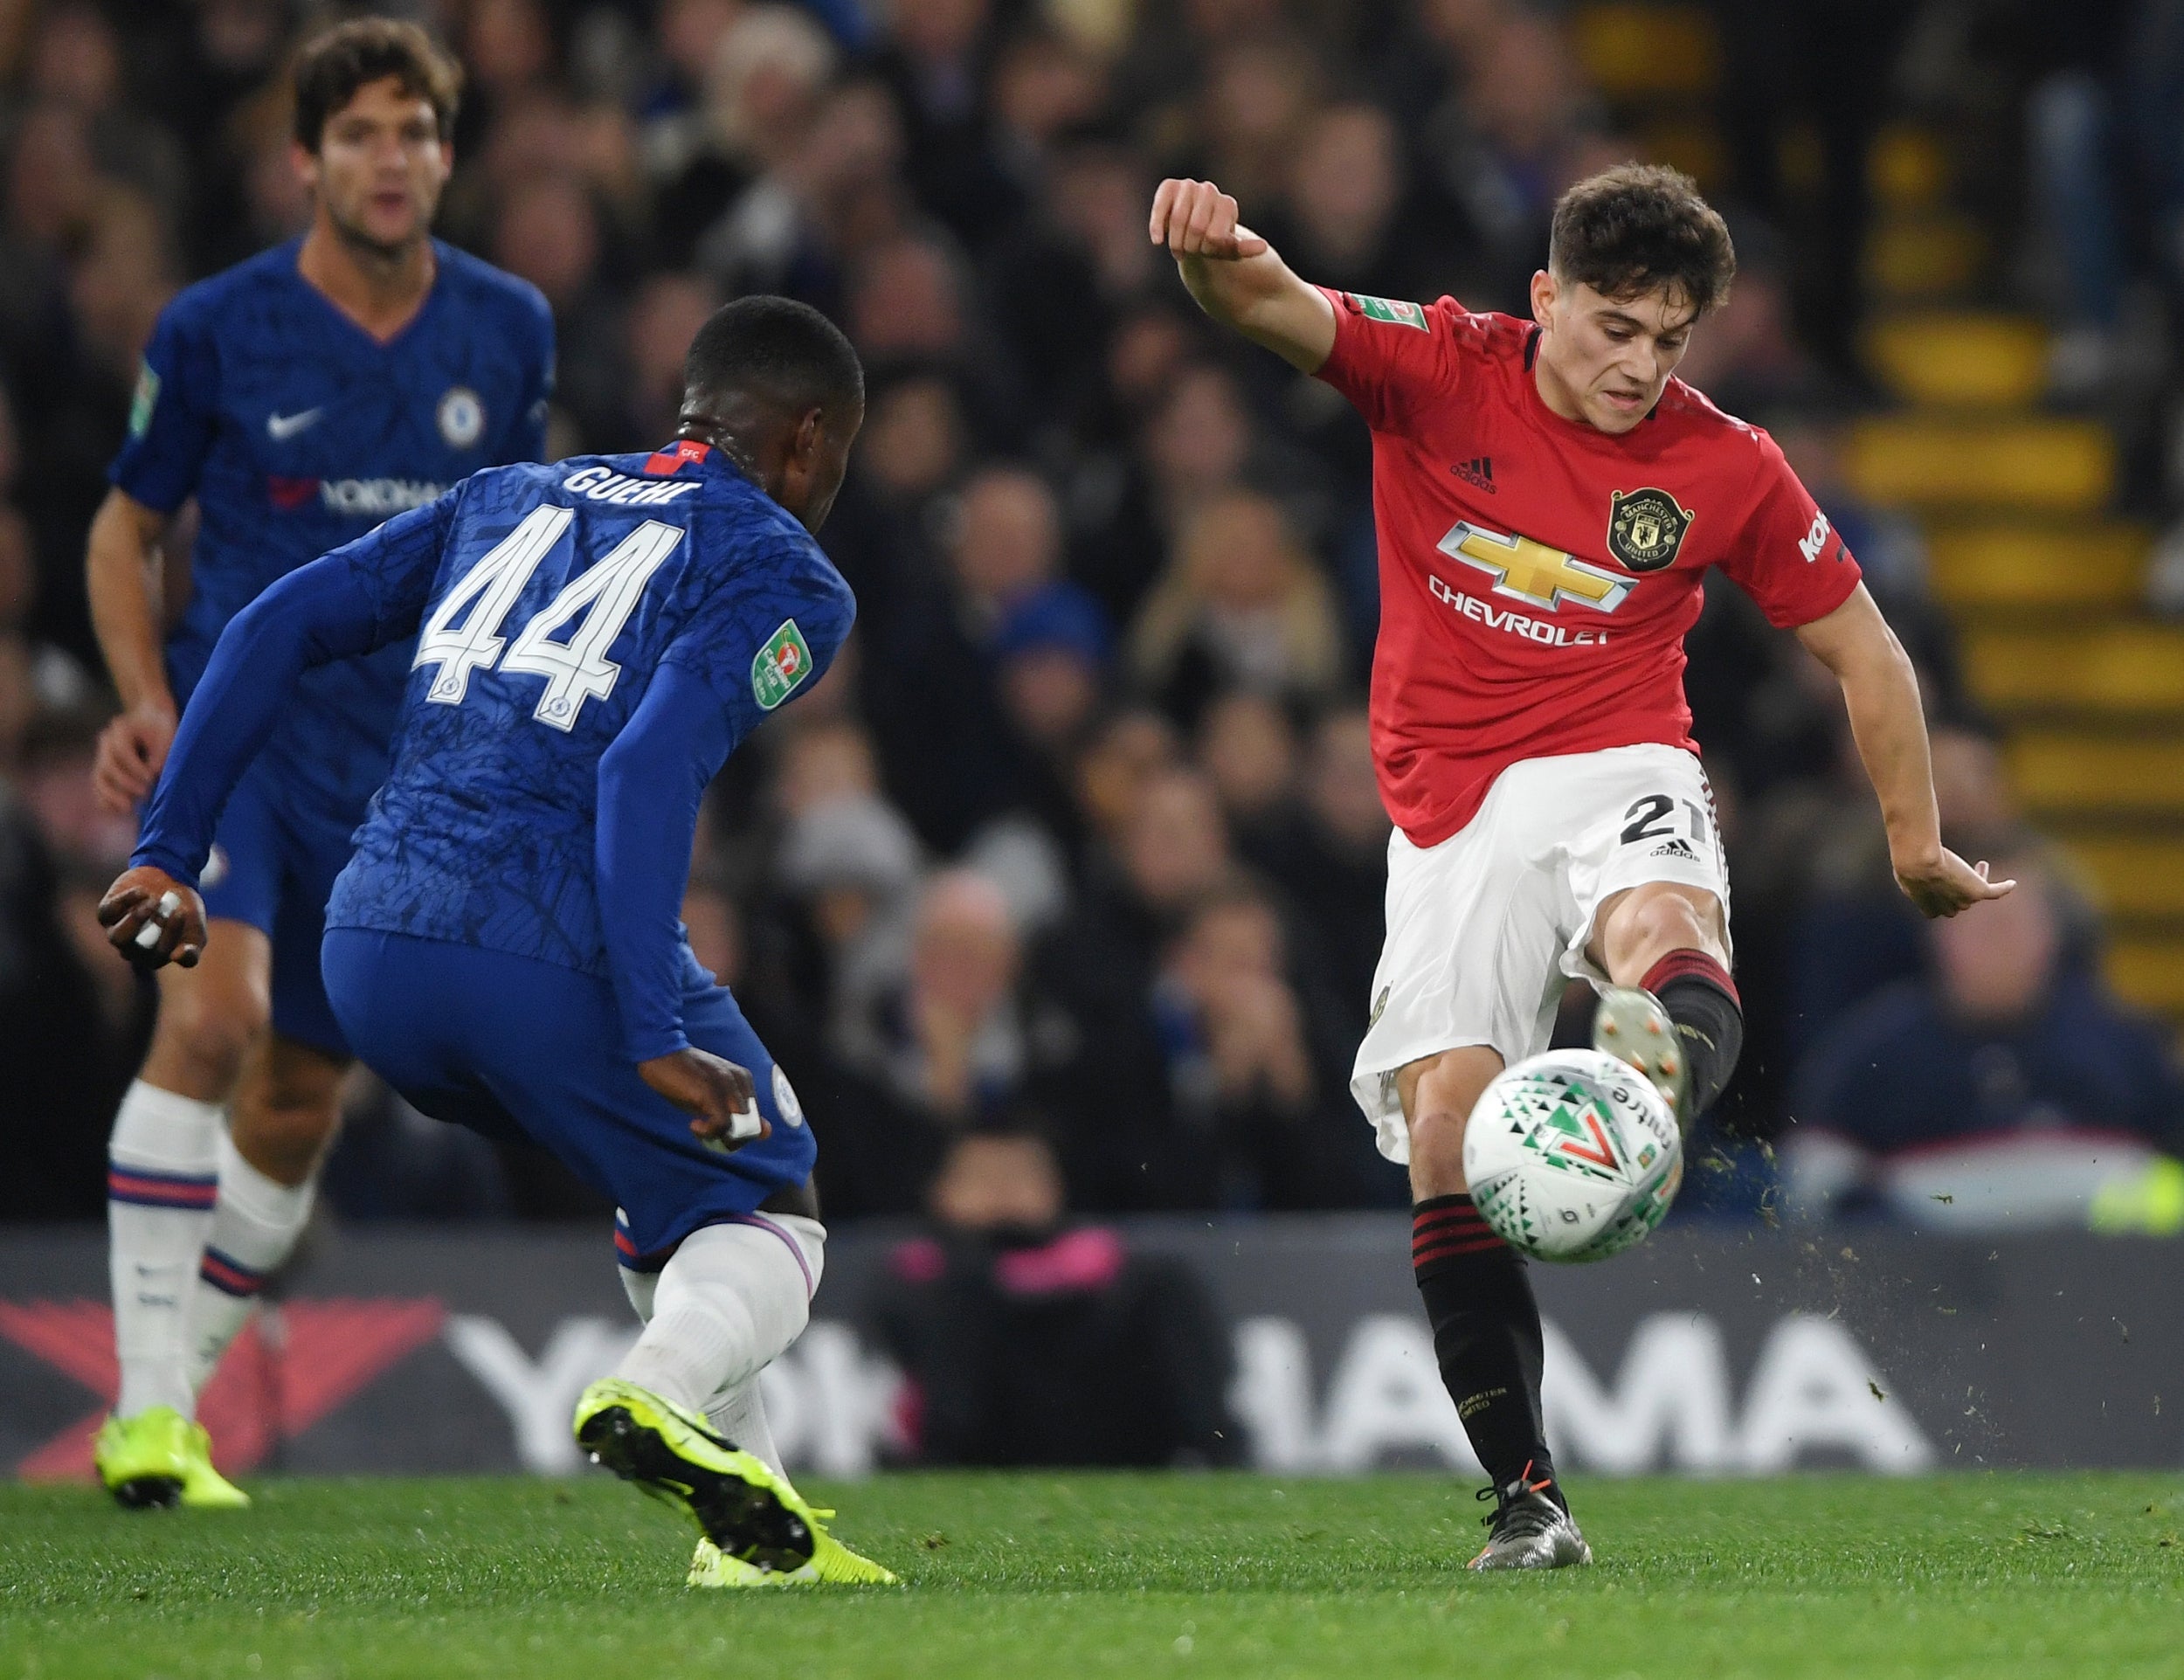 Rashford’s first came after Marcos Alonso fouled Daniel James